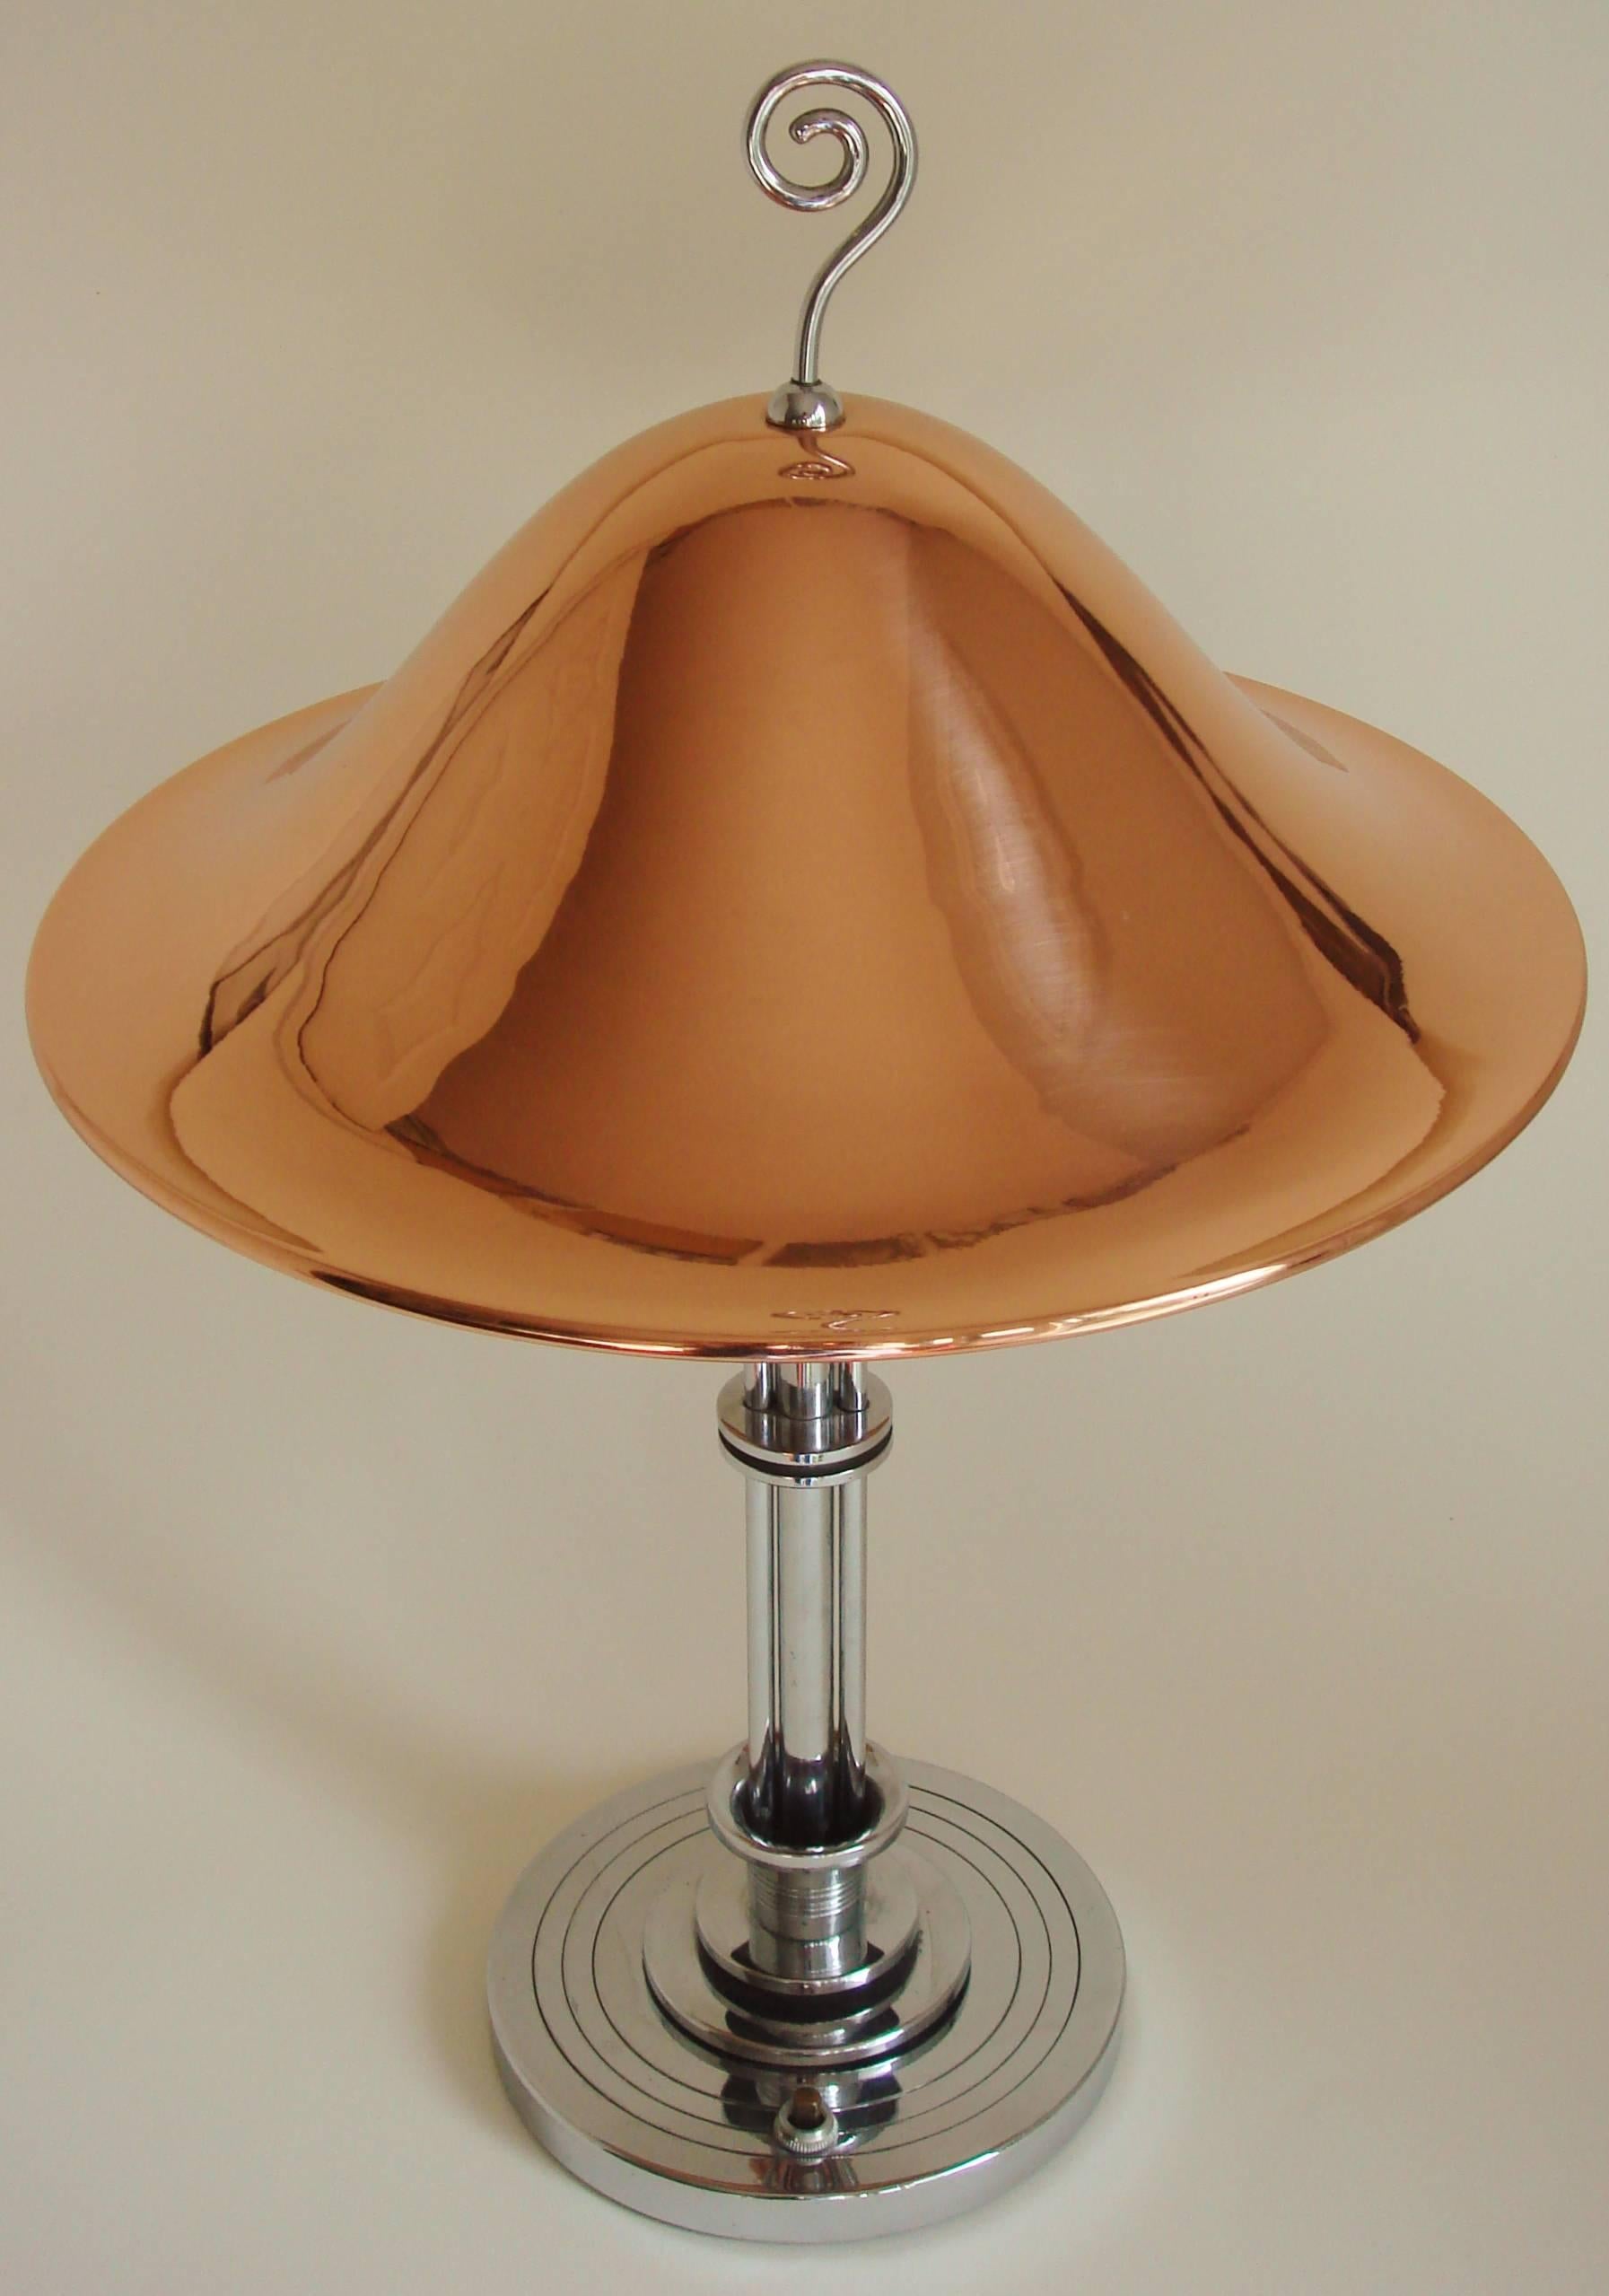 American Art Deco Chrome and Copper Organic Mushroom Lamp with Tendril Accents 2